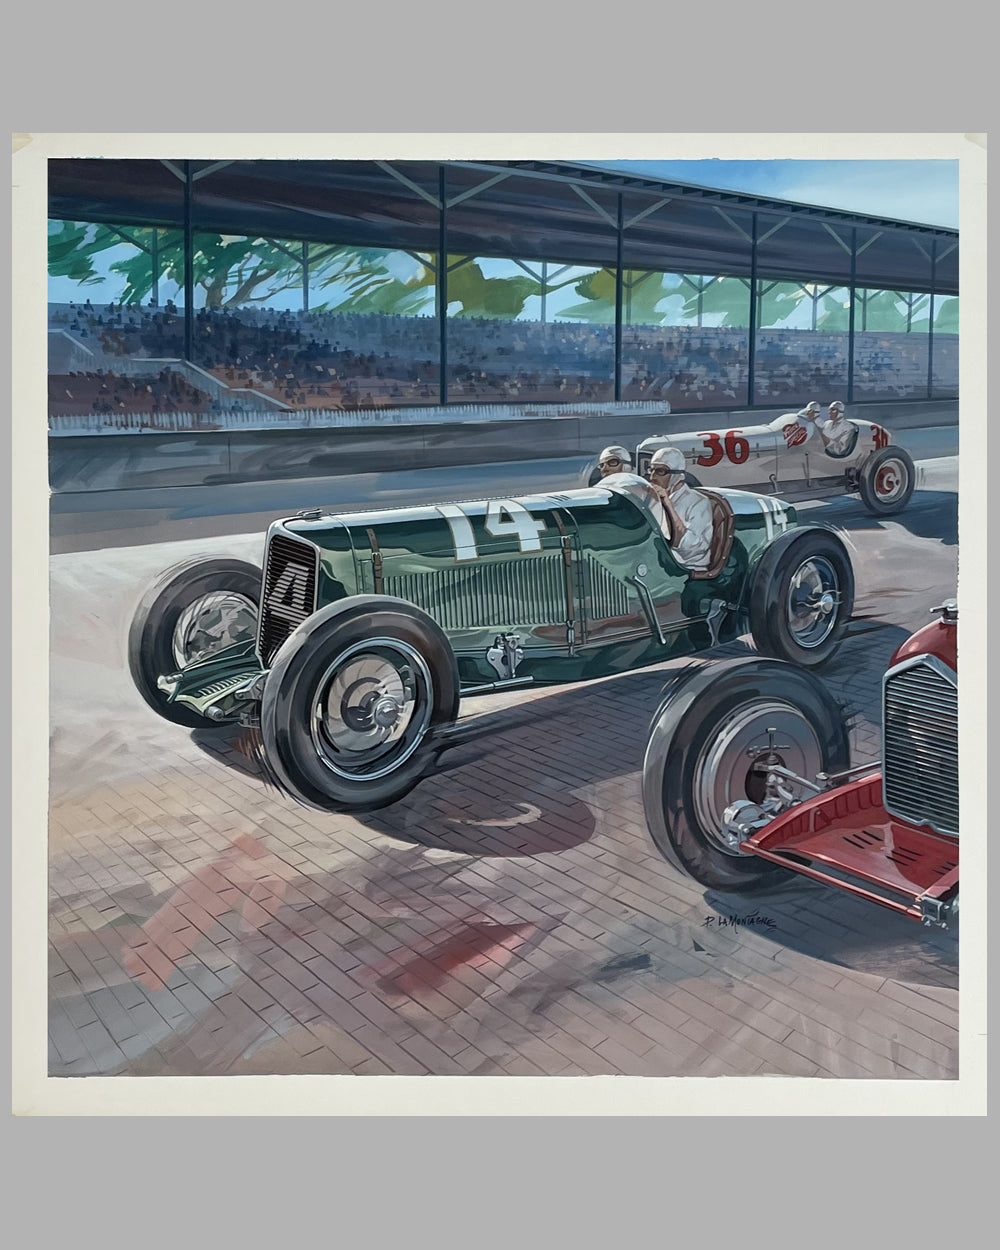 1933 Chrysler Golden Seal Special in the Lead painting by P. LaMontagne